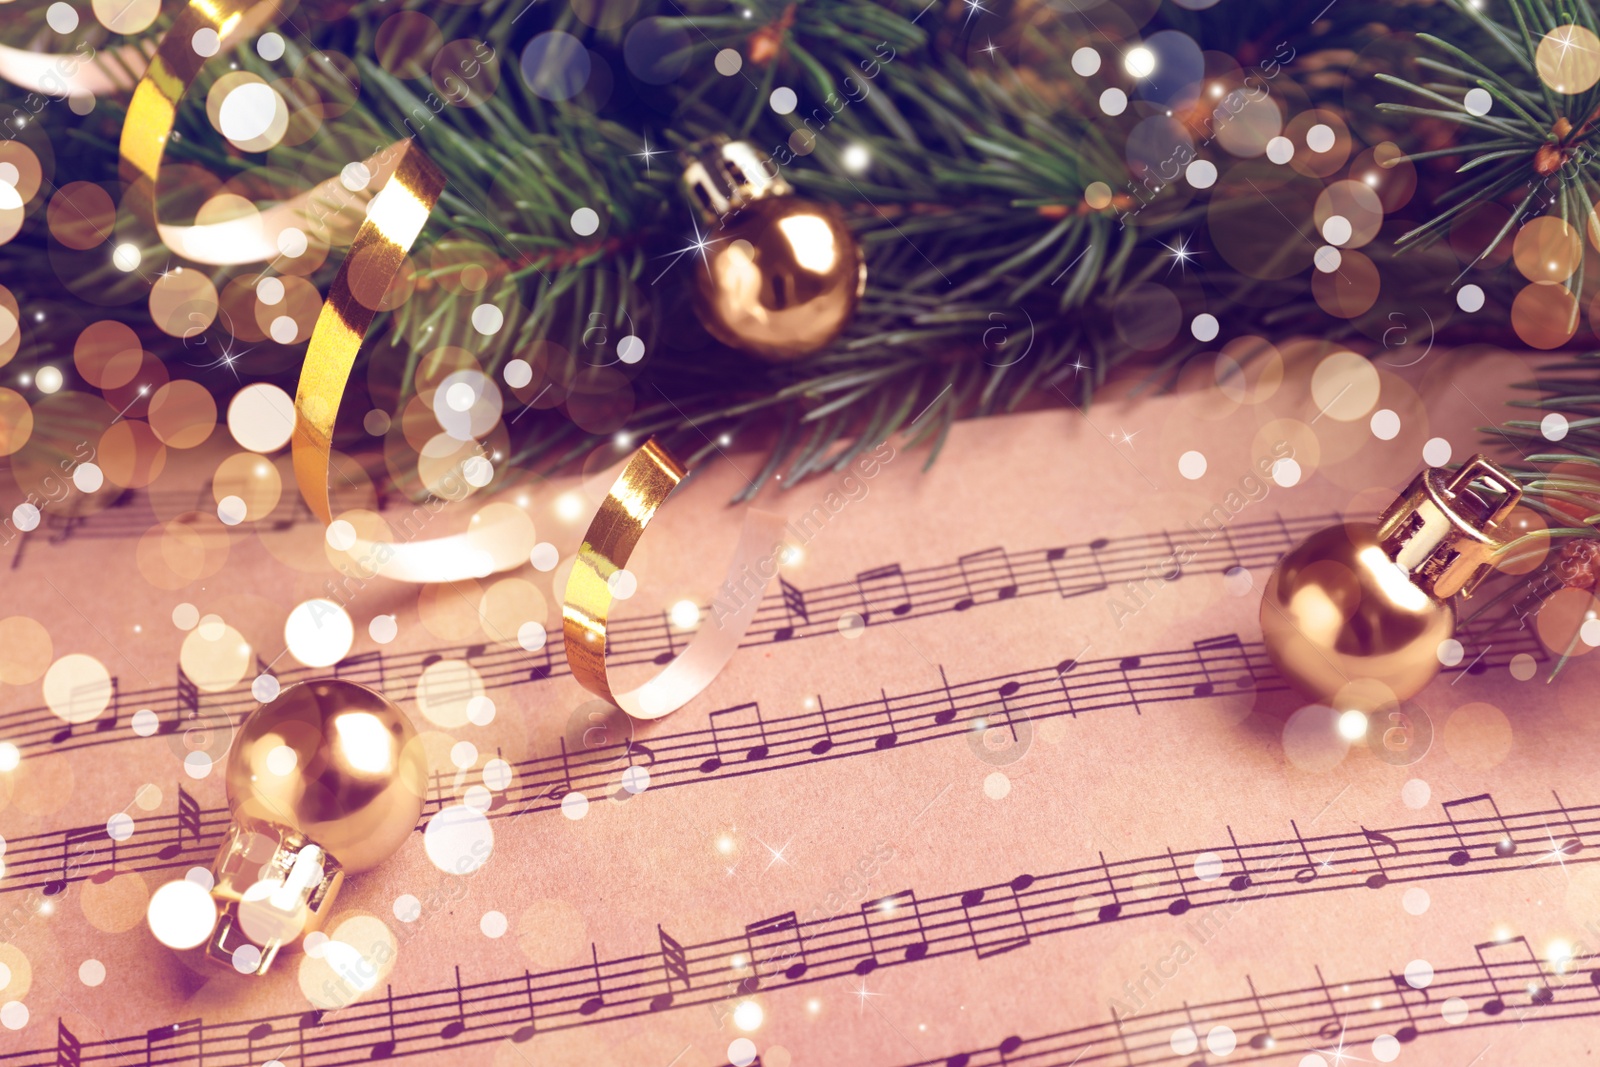 Image of Fir branches and golden balls on Christmas music sheets, above view. Bokeh effect